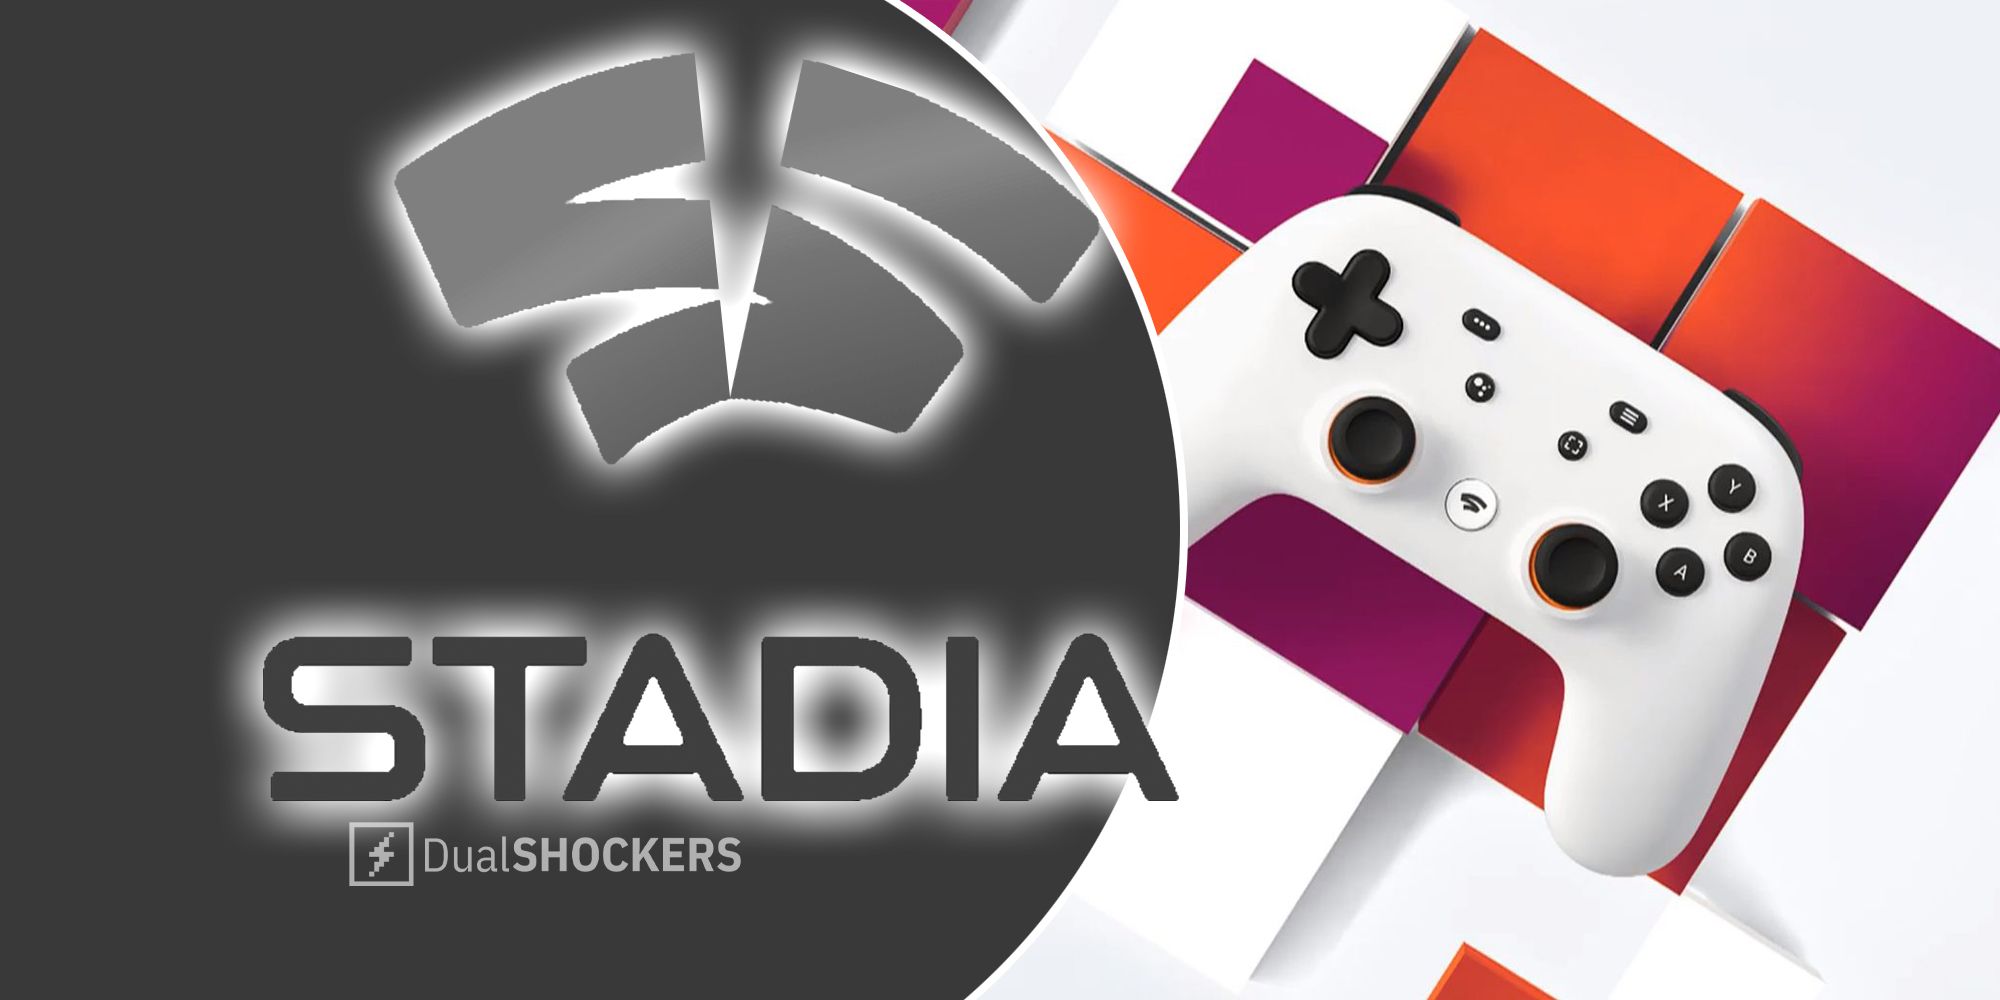 Google Stadia's Death and controller